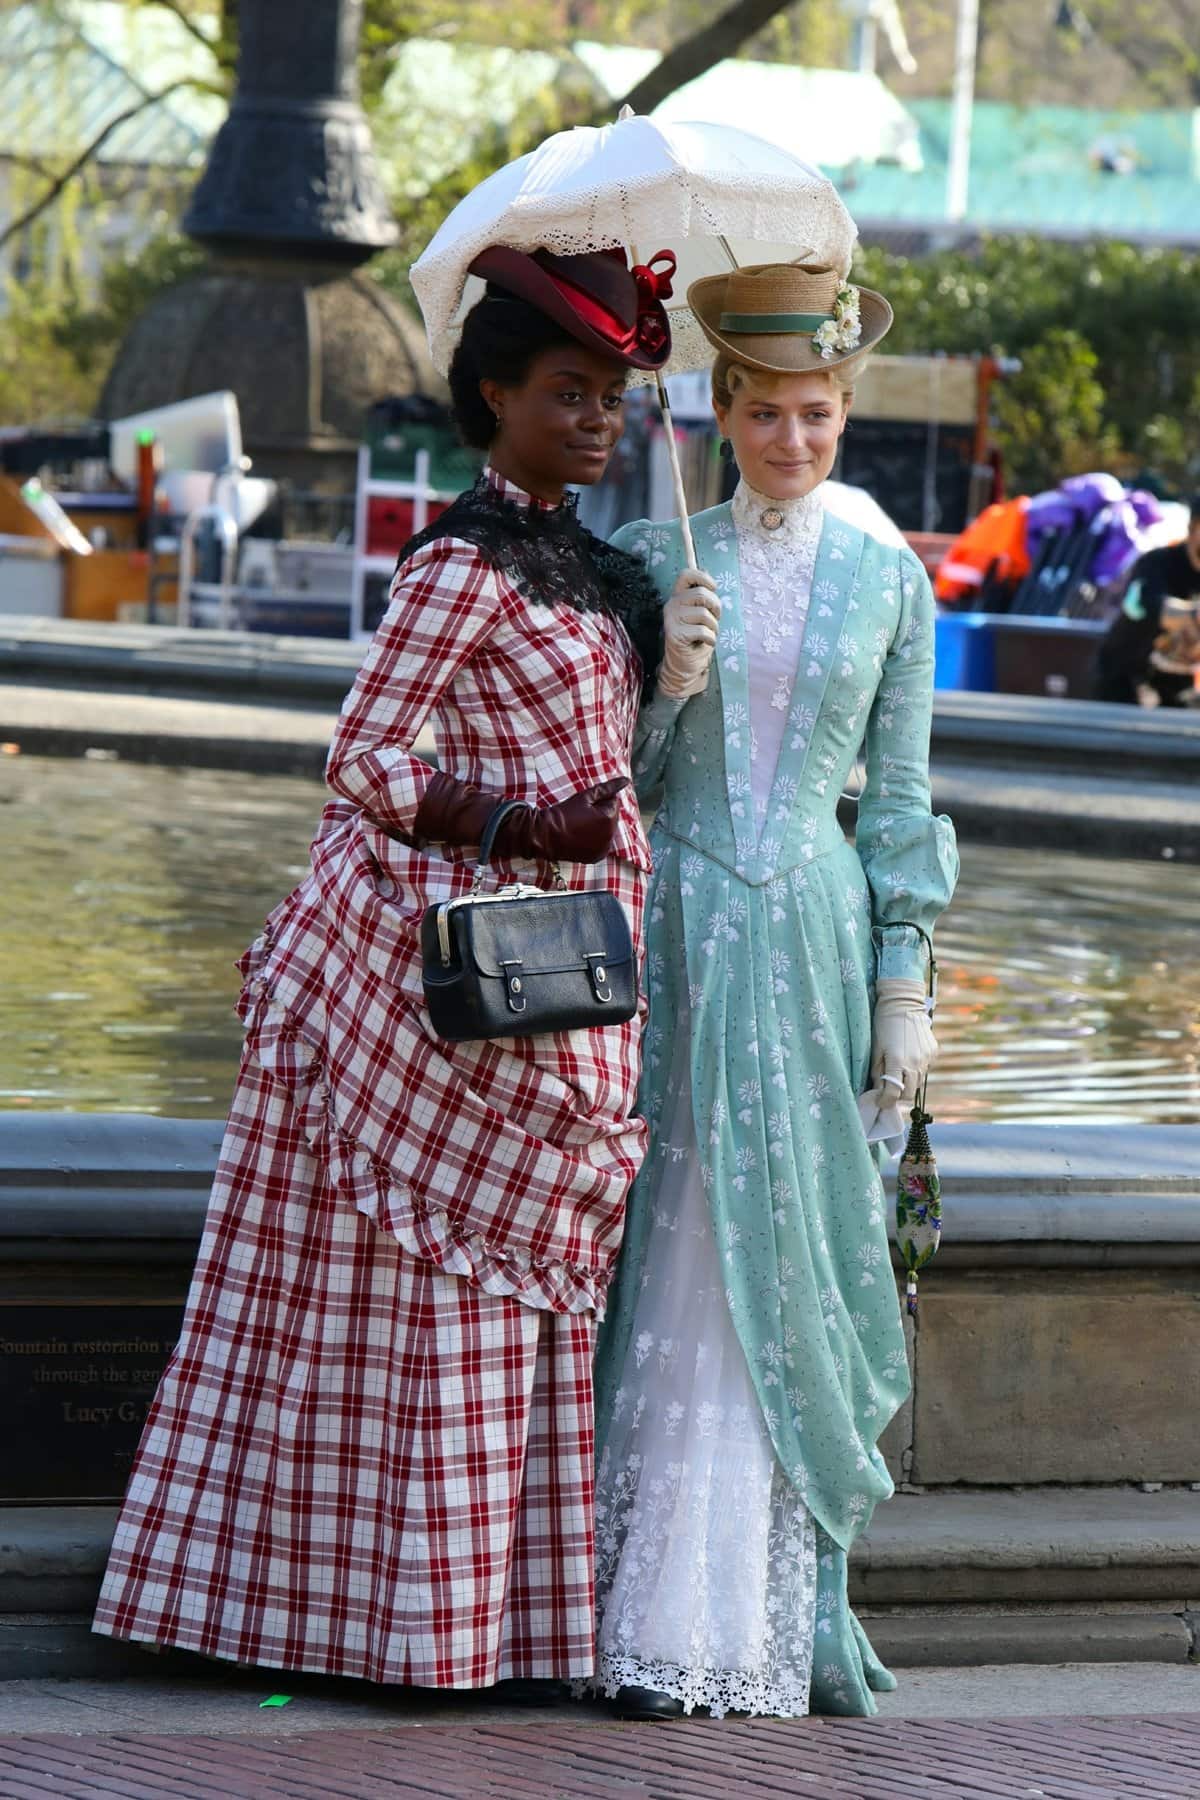 Denee Benton and Louisa Jacobson are seen at the film set of the American historical drama television series The Gilded Age